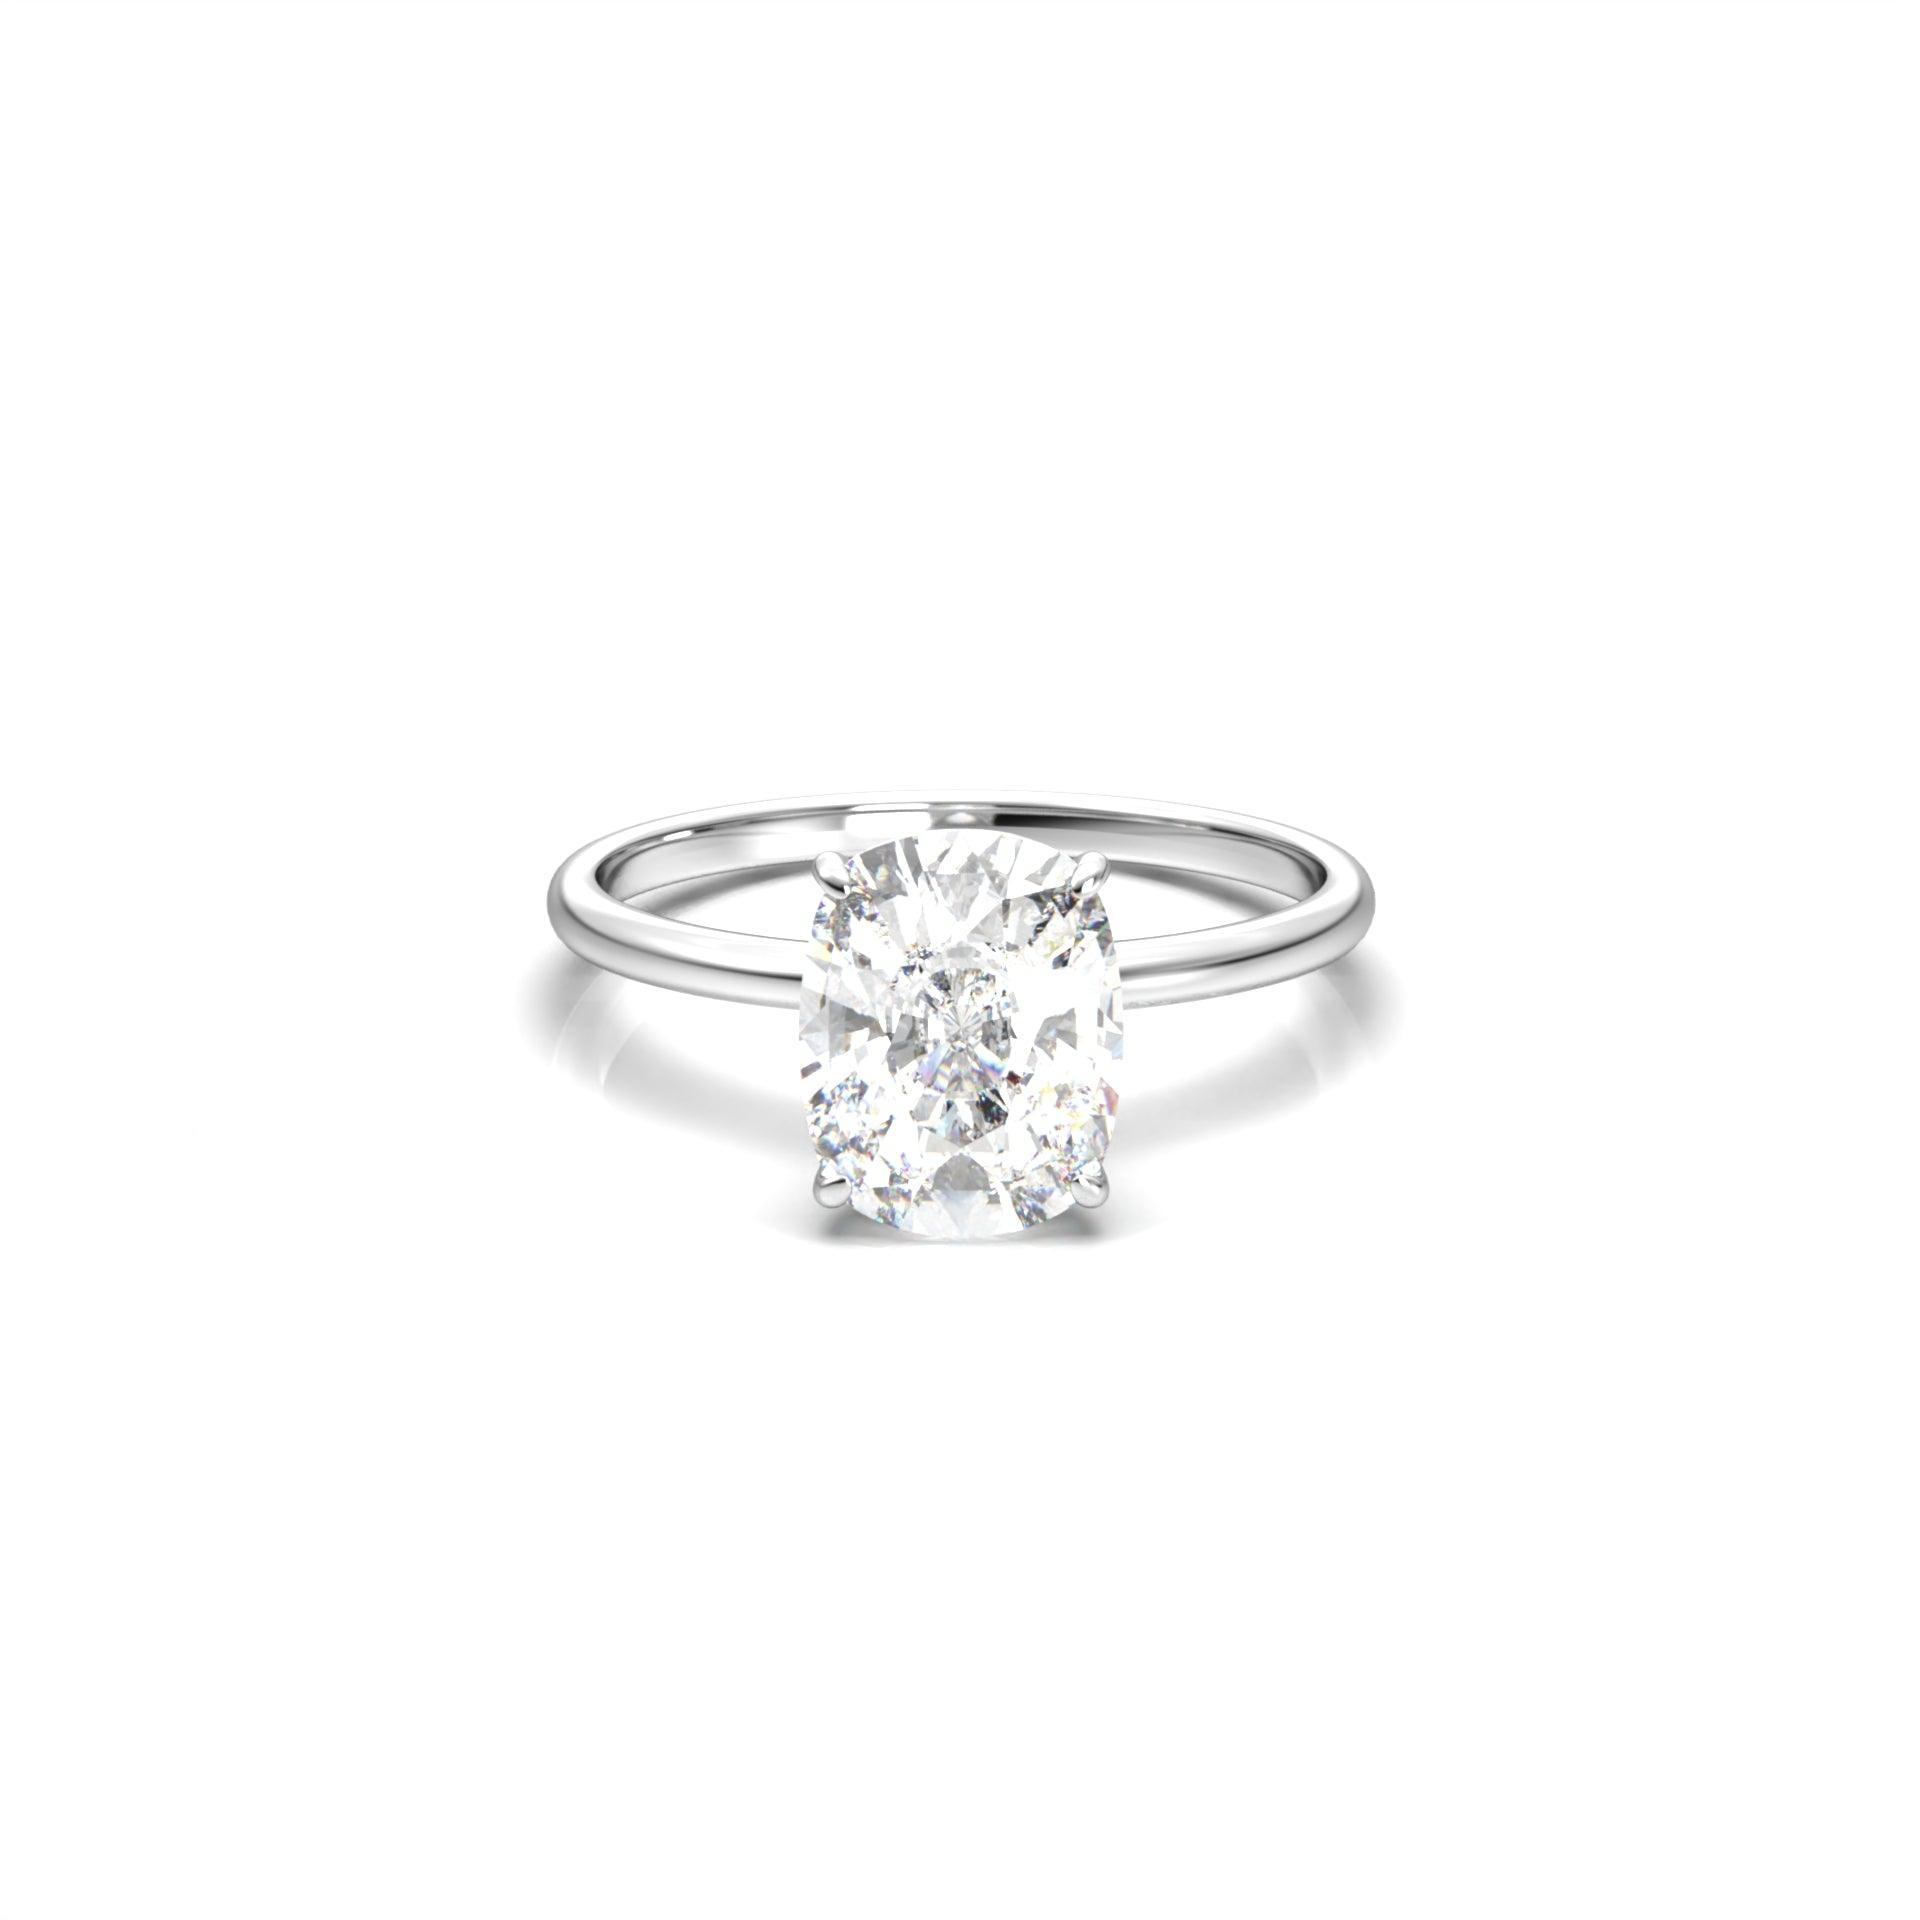 Elongated Cushion Cut Solitaire 4 Claw With Hidden Halo Moissanite Engagement Ring - moissaniteengagementrings